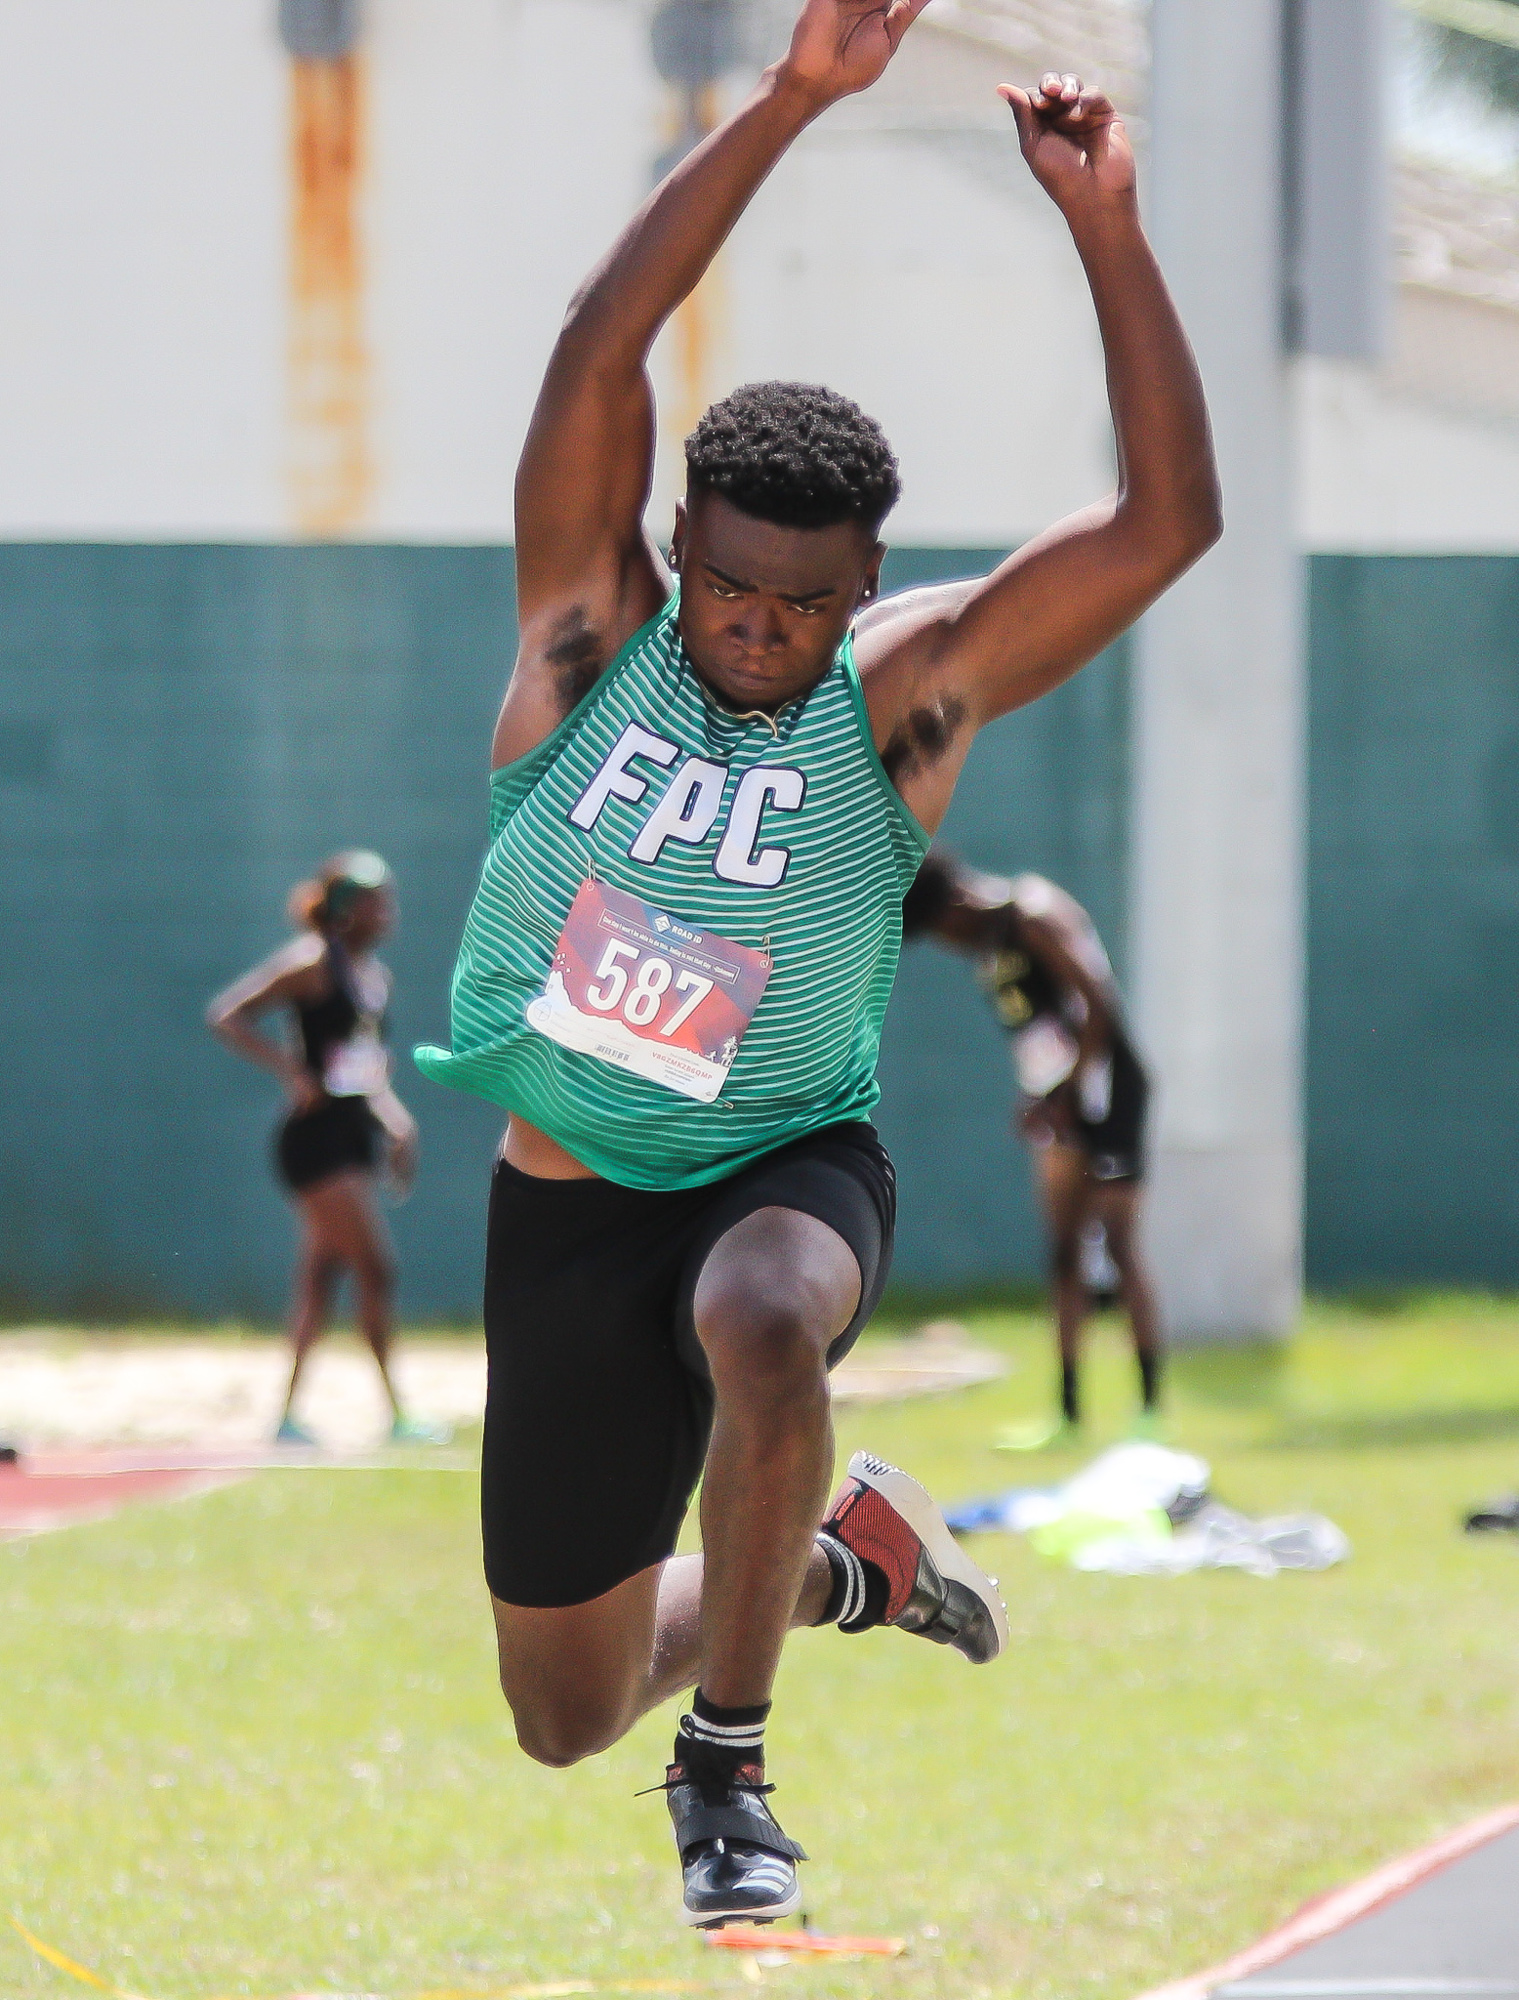 Curtis Gray competes in the triple jump at the district meet on April 9 at FPC High School. File photo